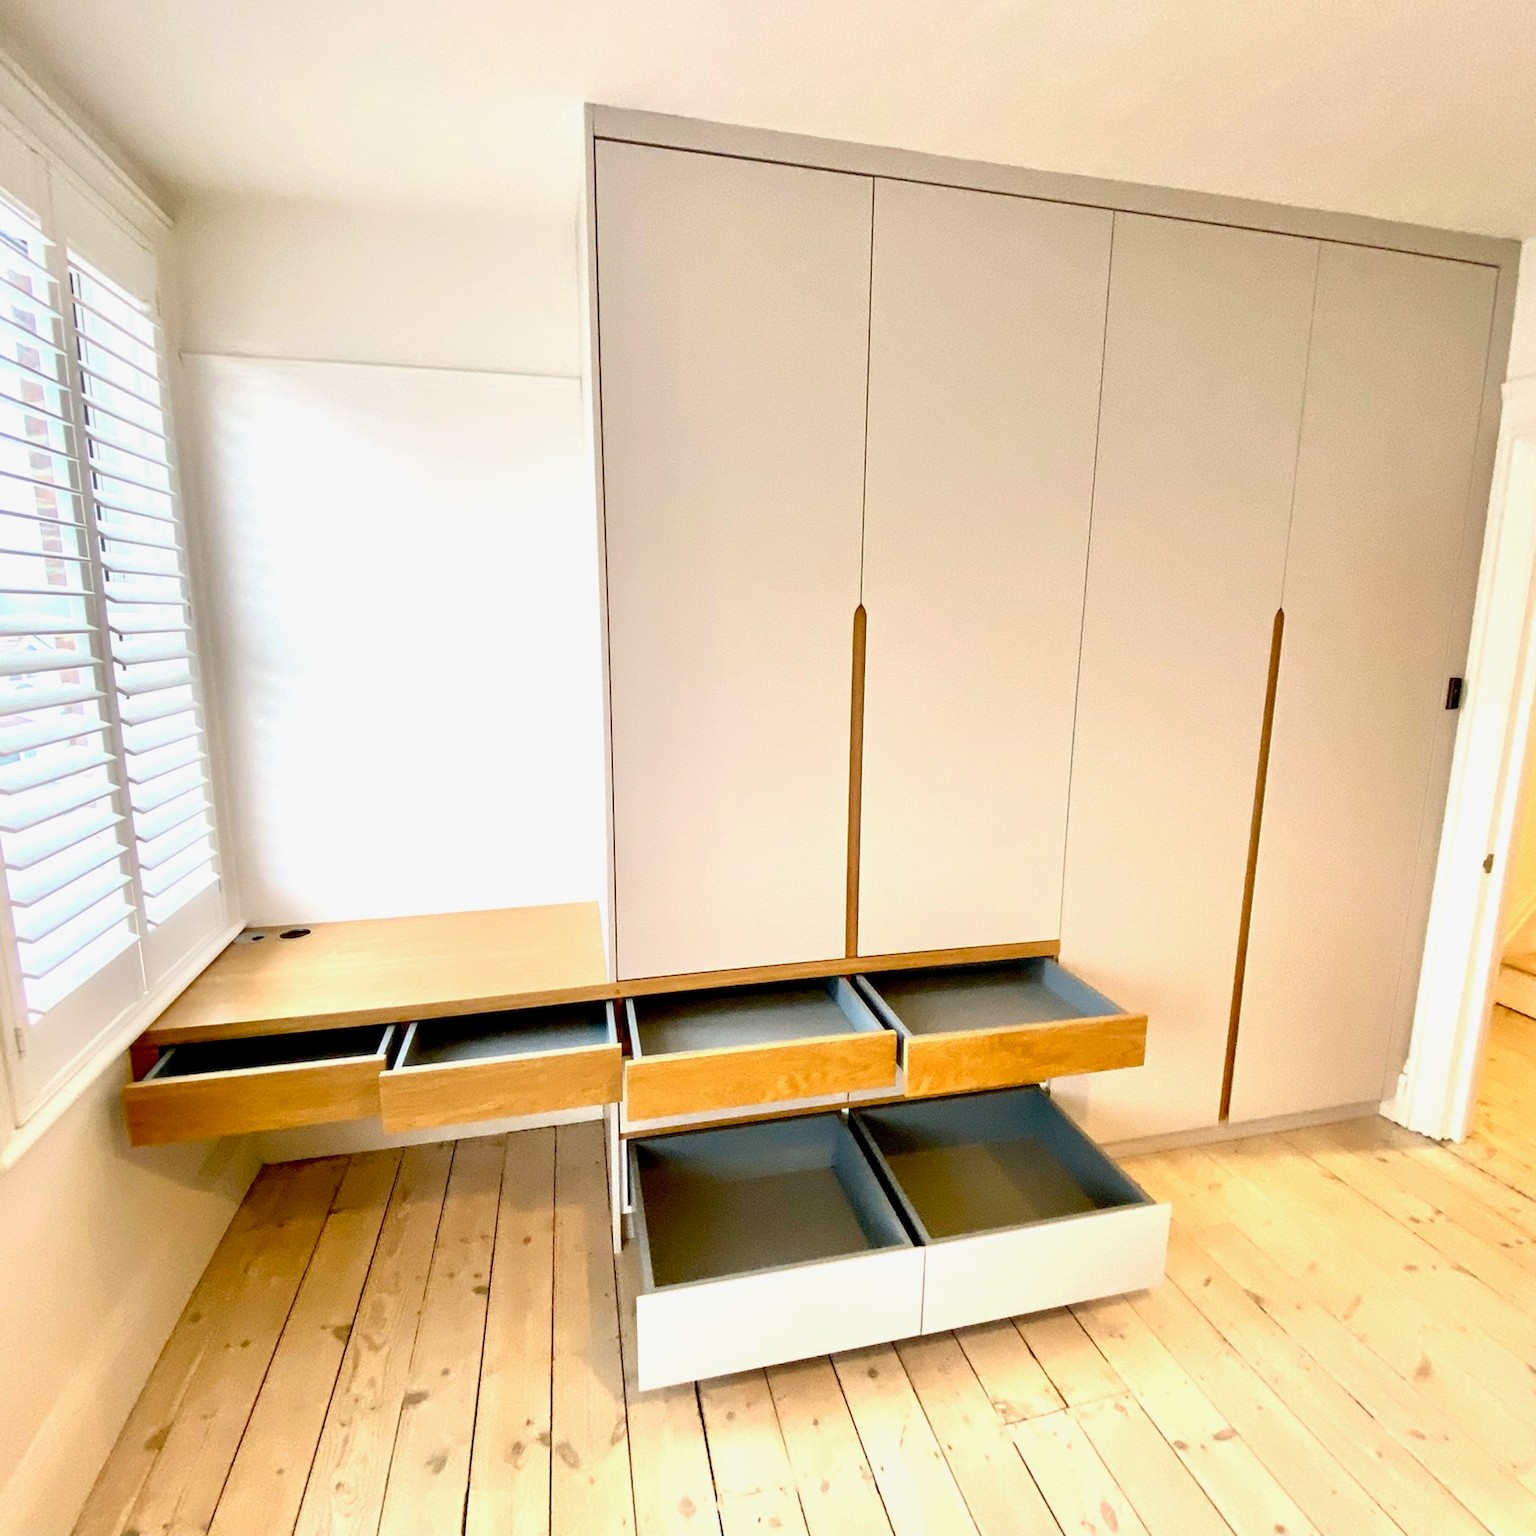 fitted wardrobes with integrated desk and drawers